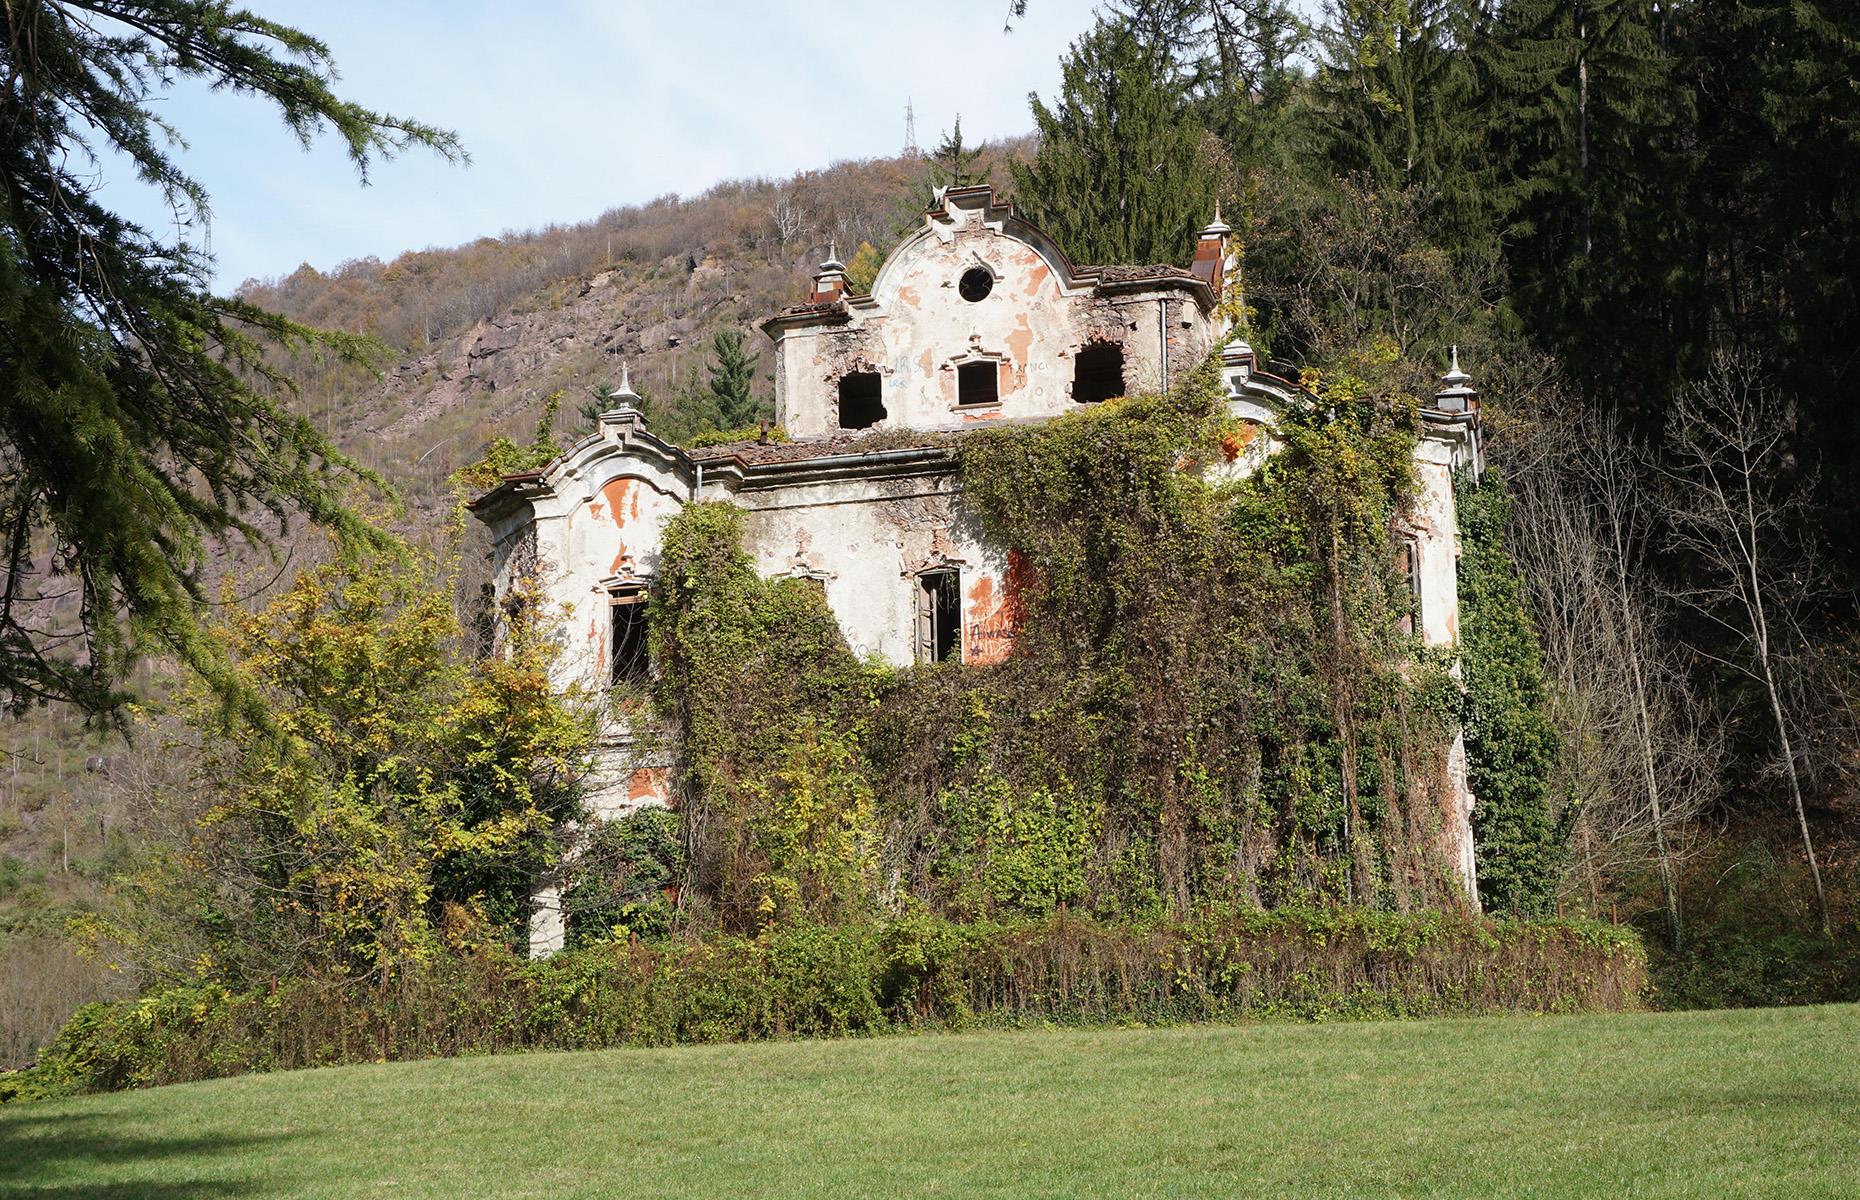 <p>Rumoured to be haunted, this magnificent stately home situated just east of Lake Como was built between 1854-1857 as the summer residence of Count Felix De Vecchi.</p>  <p>However, Villa De Vecchi, or the Red House as the property is alternately known, only survived a few short years before a string of tragedies led to its decline.</p>